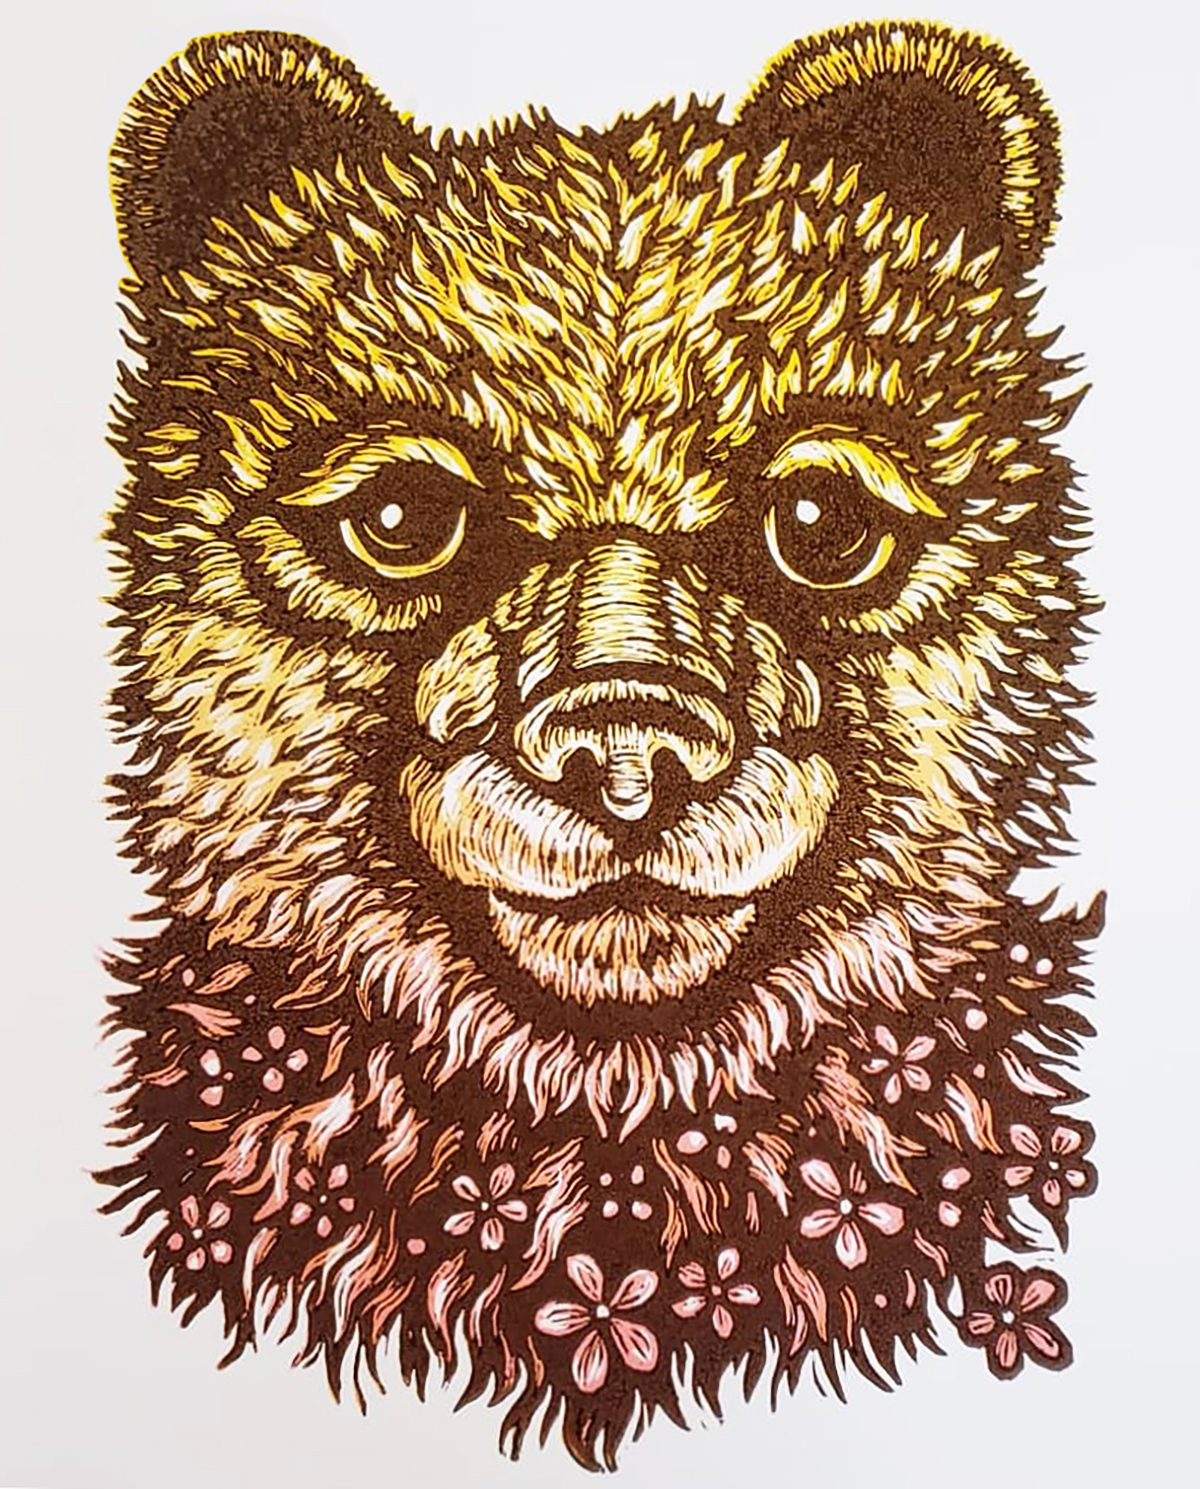 Layer By Layer: The Multiblock Woodcut